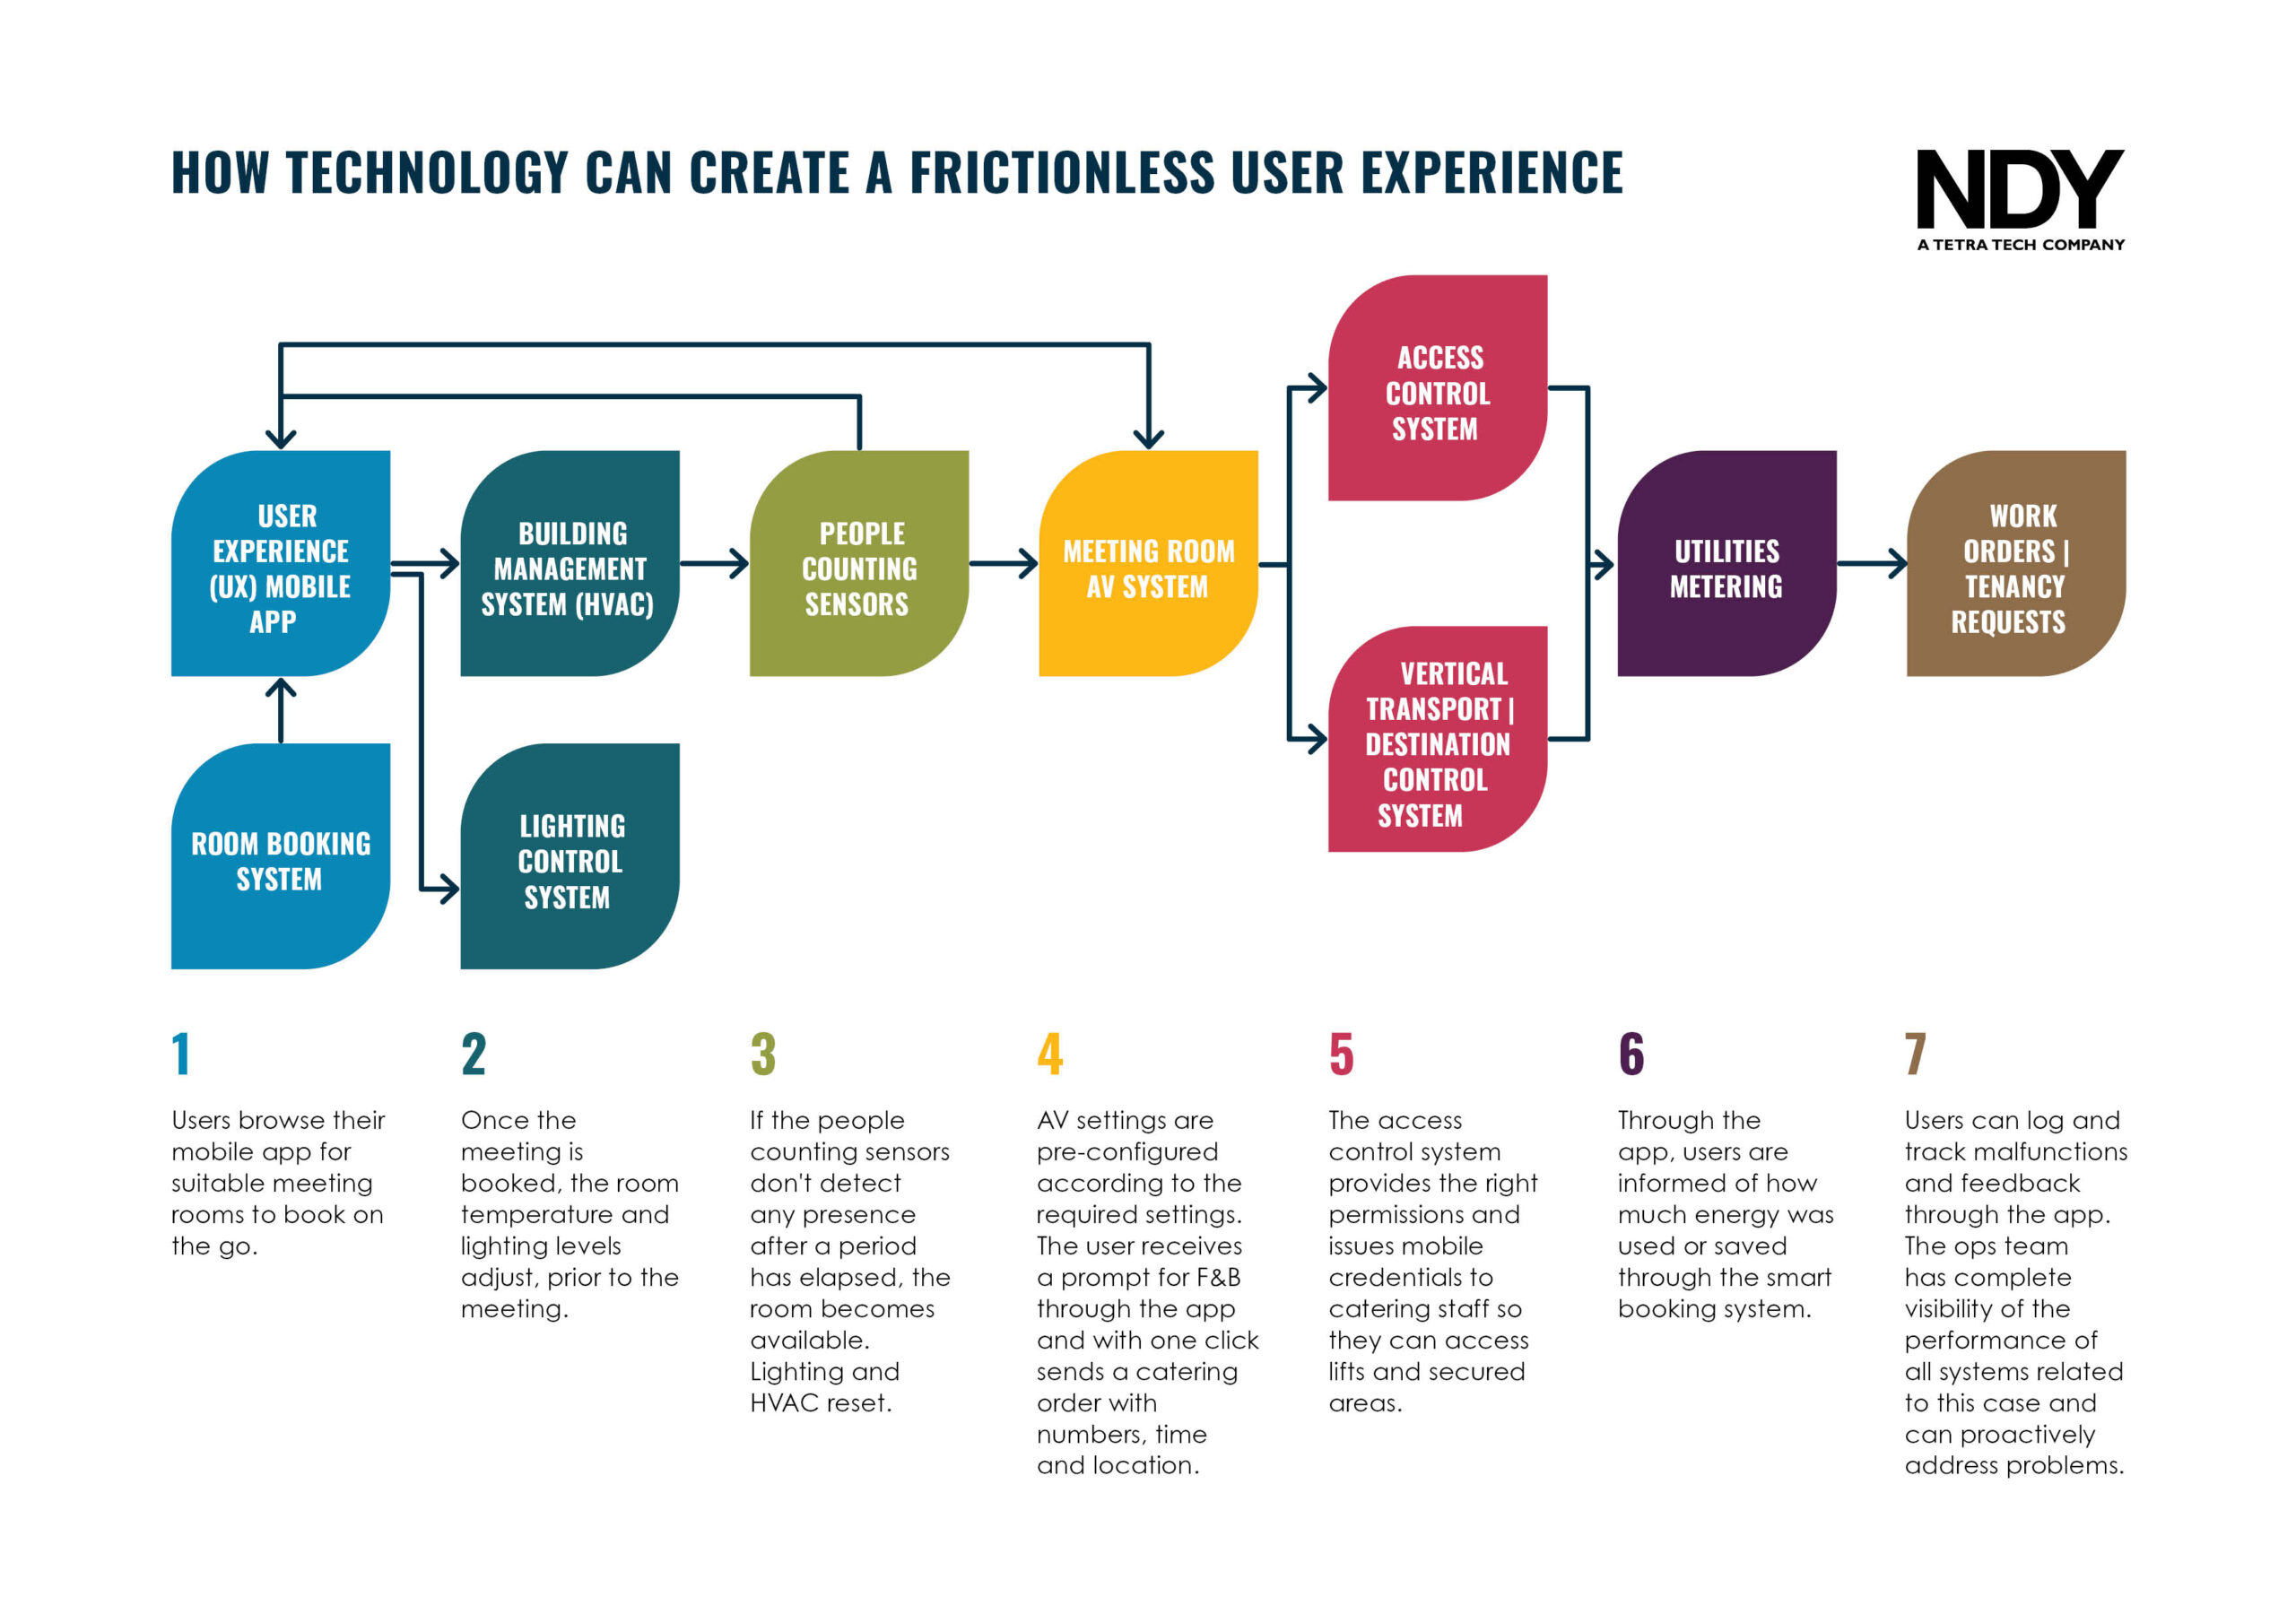 Graphic: How technology can create a frictionless user experience